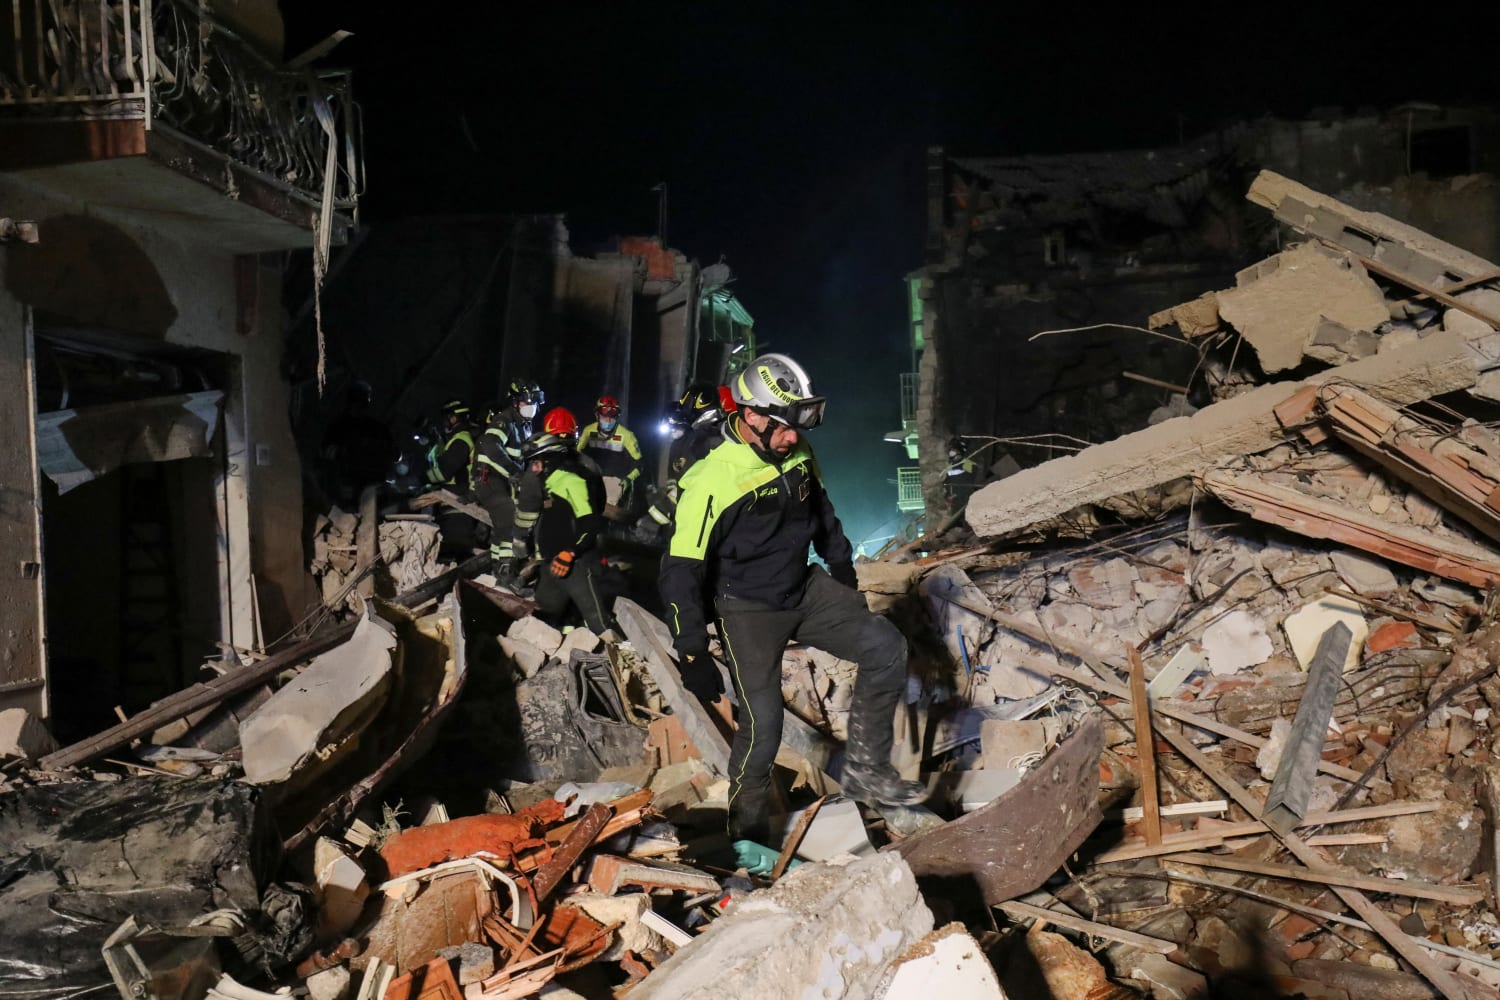 At least four dead after gas explosion in Sicily